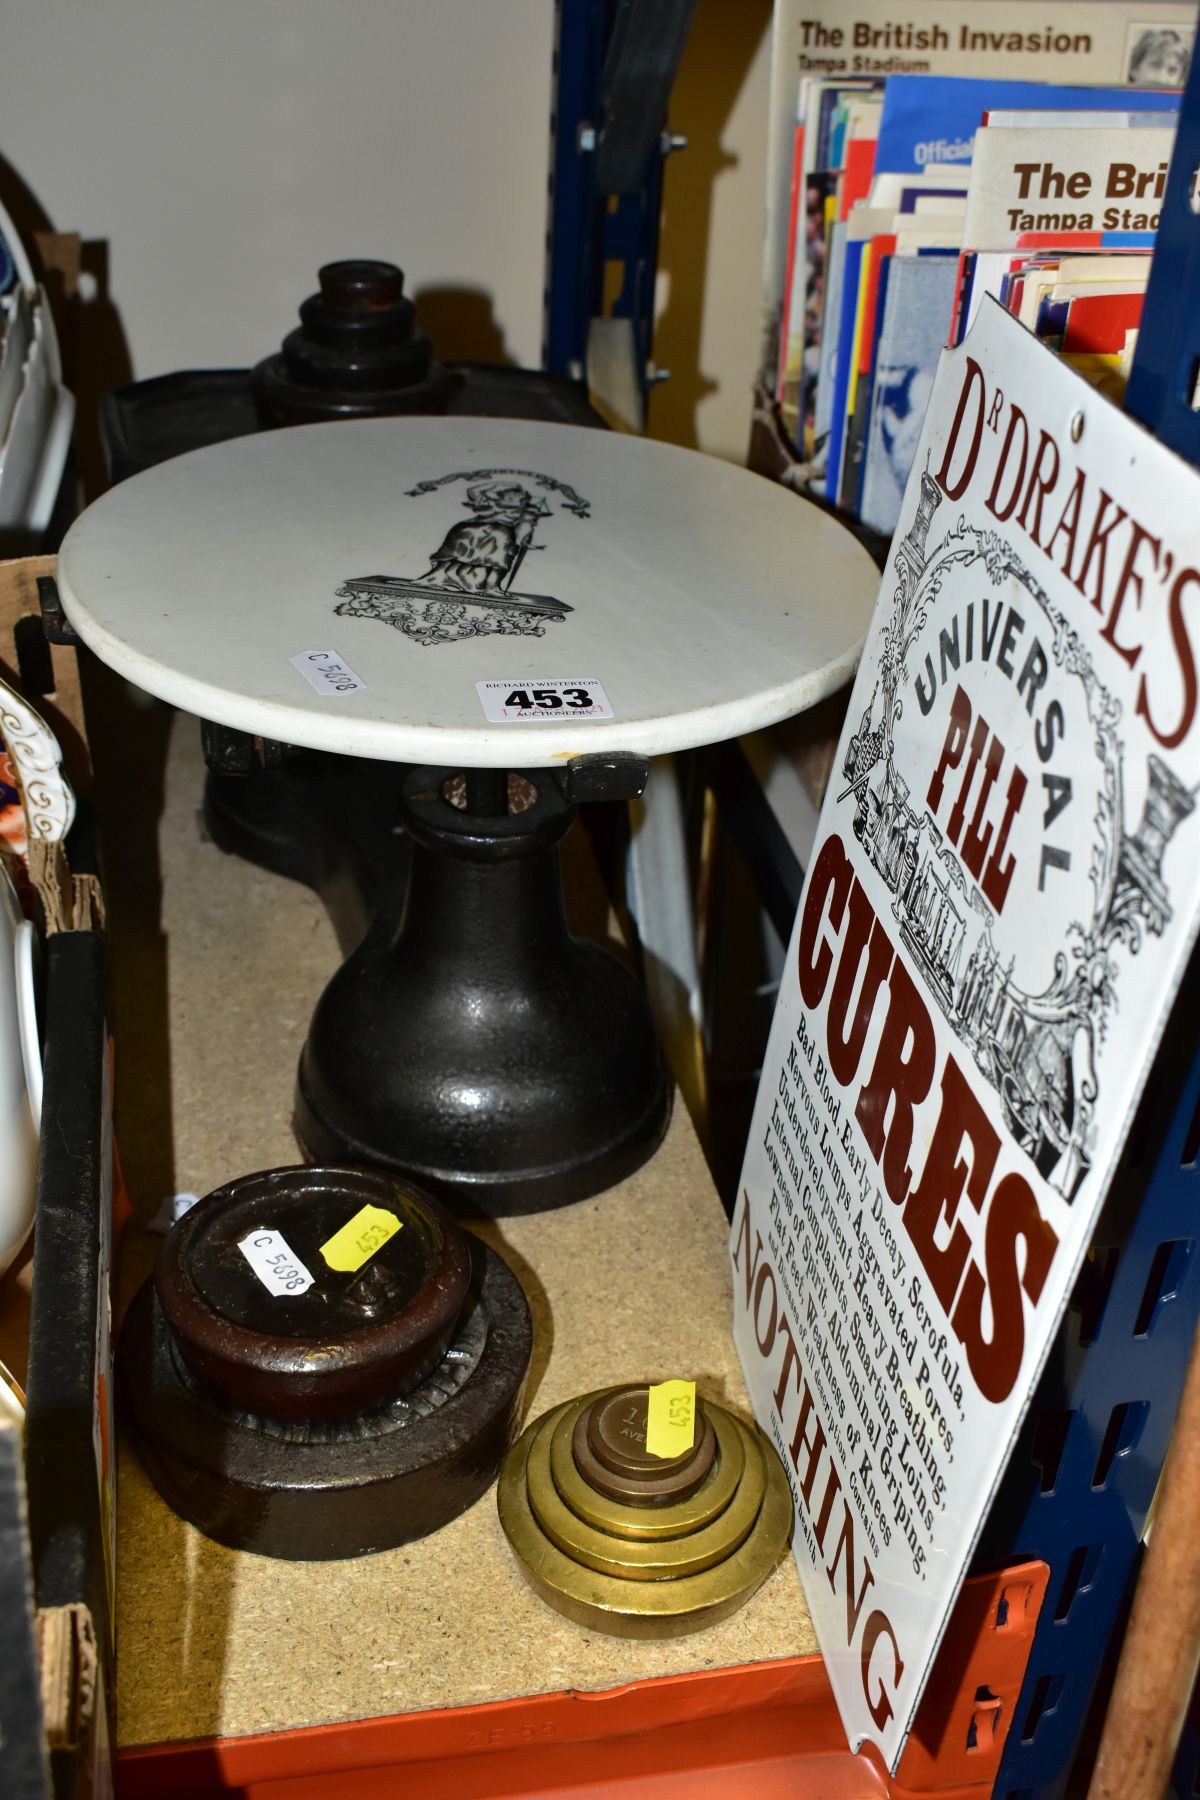 A SET OF TABLE TOP BALANCE SCALES, no makers marking, black painted cast iron base with circular